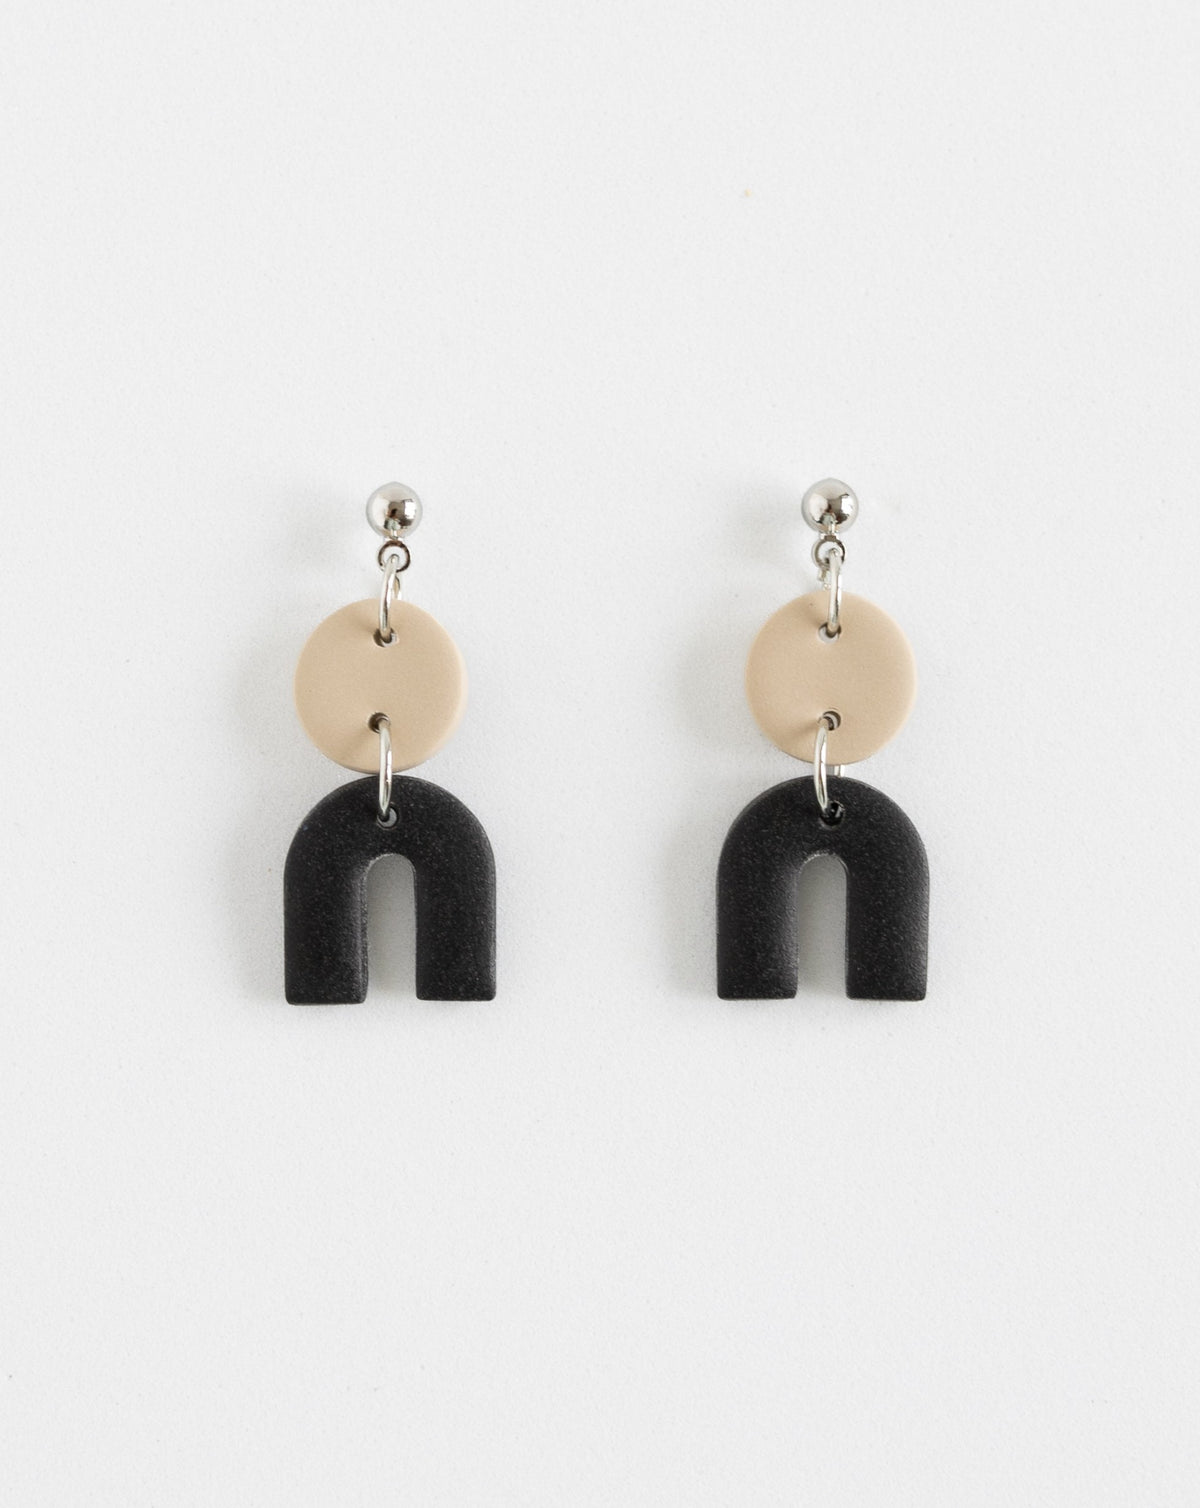 Tiny Arch earrings in two part of Beige and black clay parts with silver Ball studs, front view.